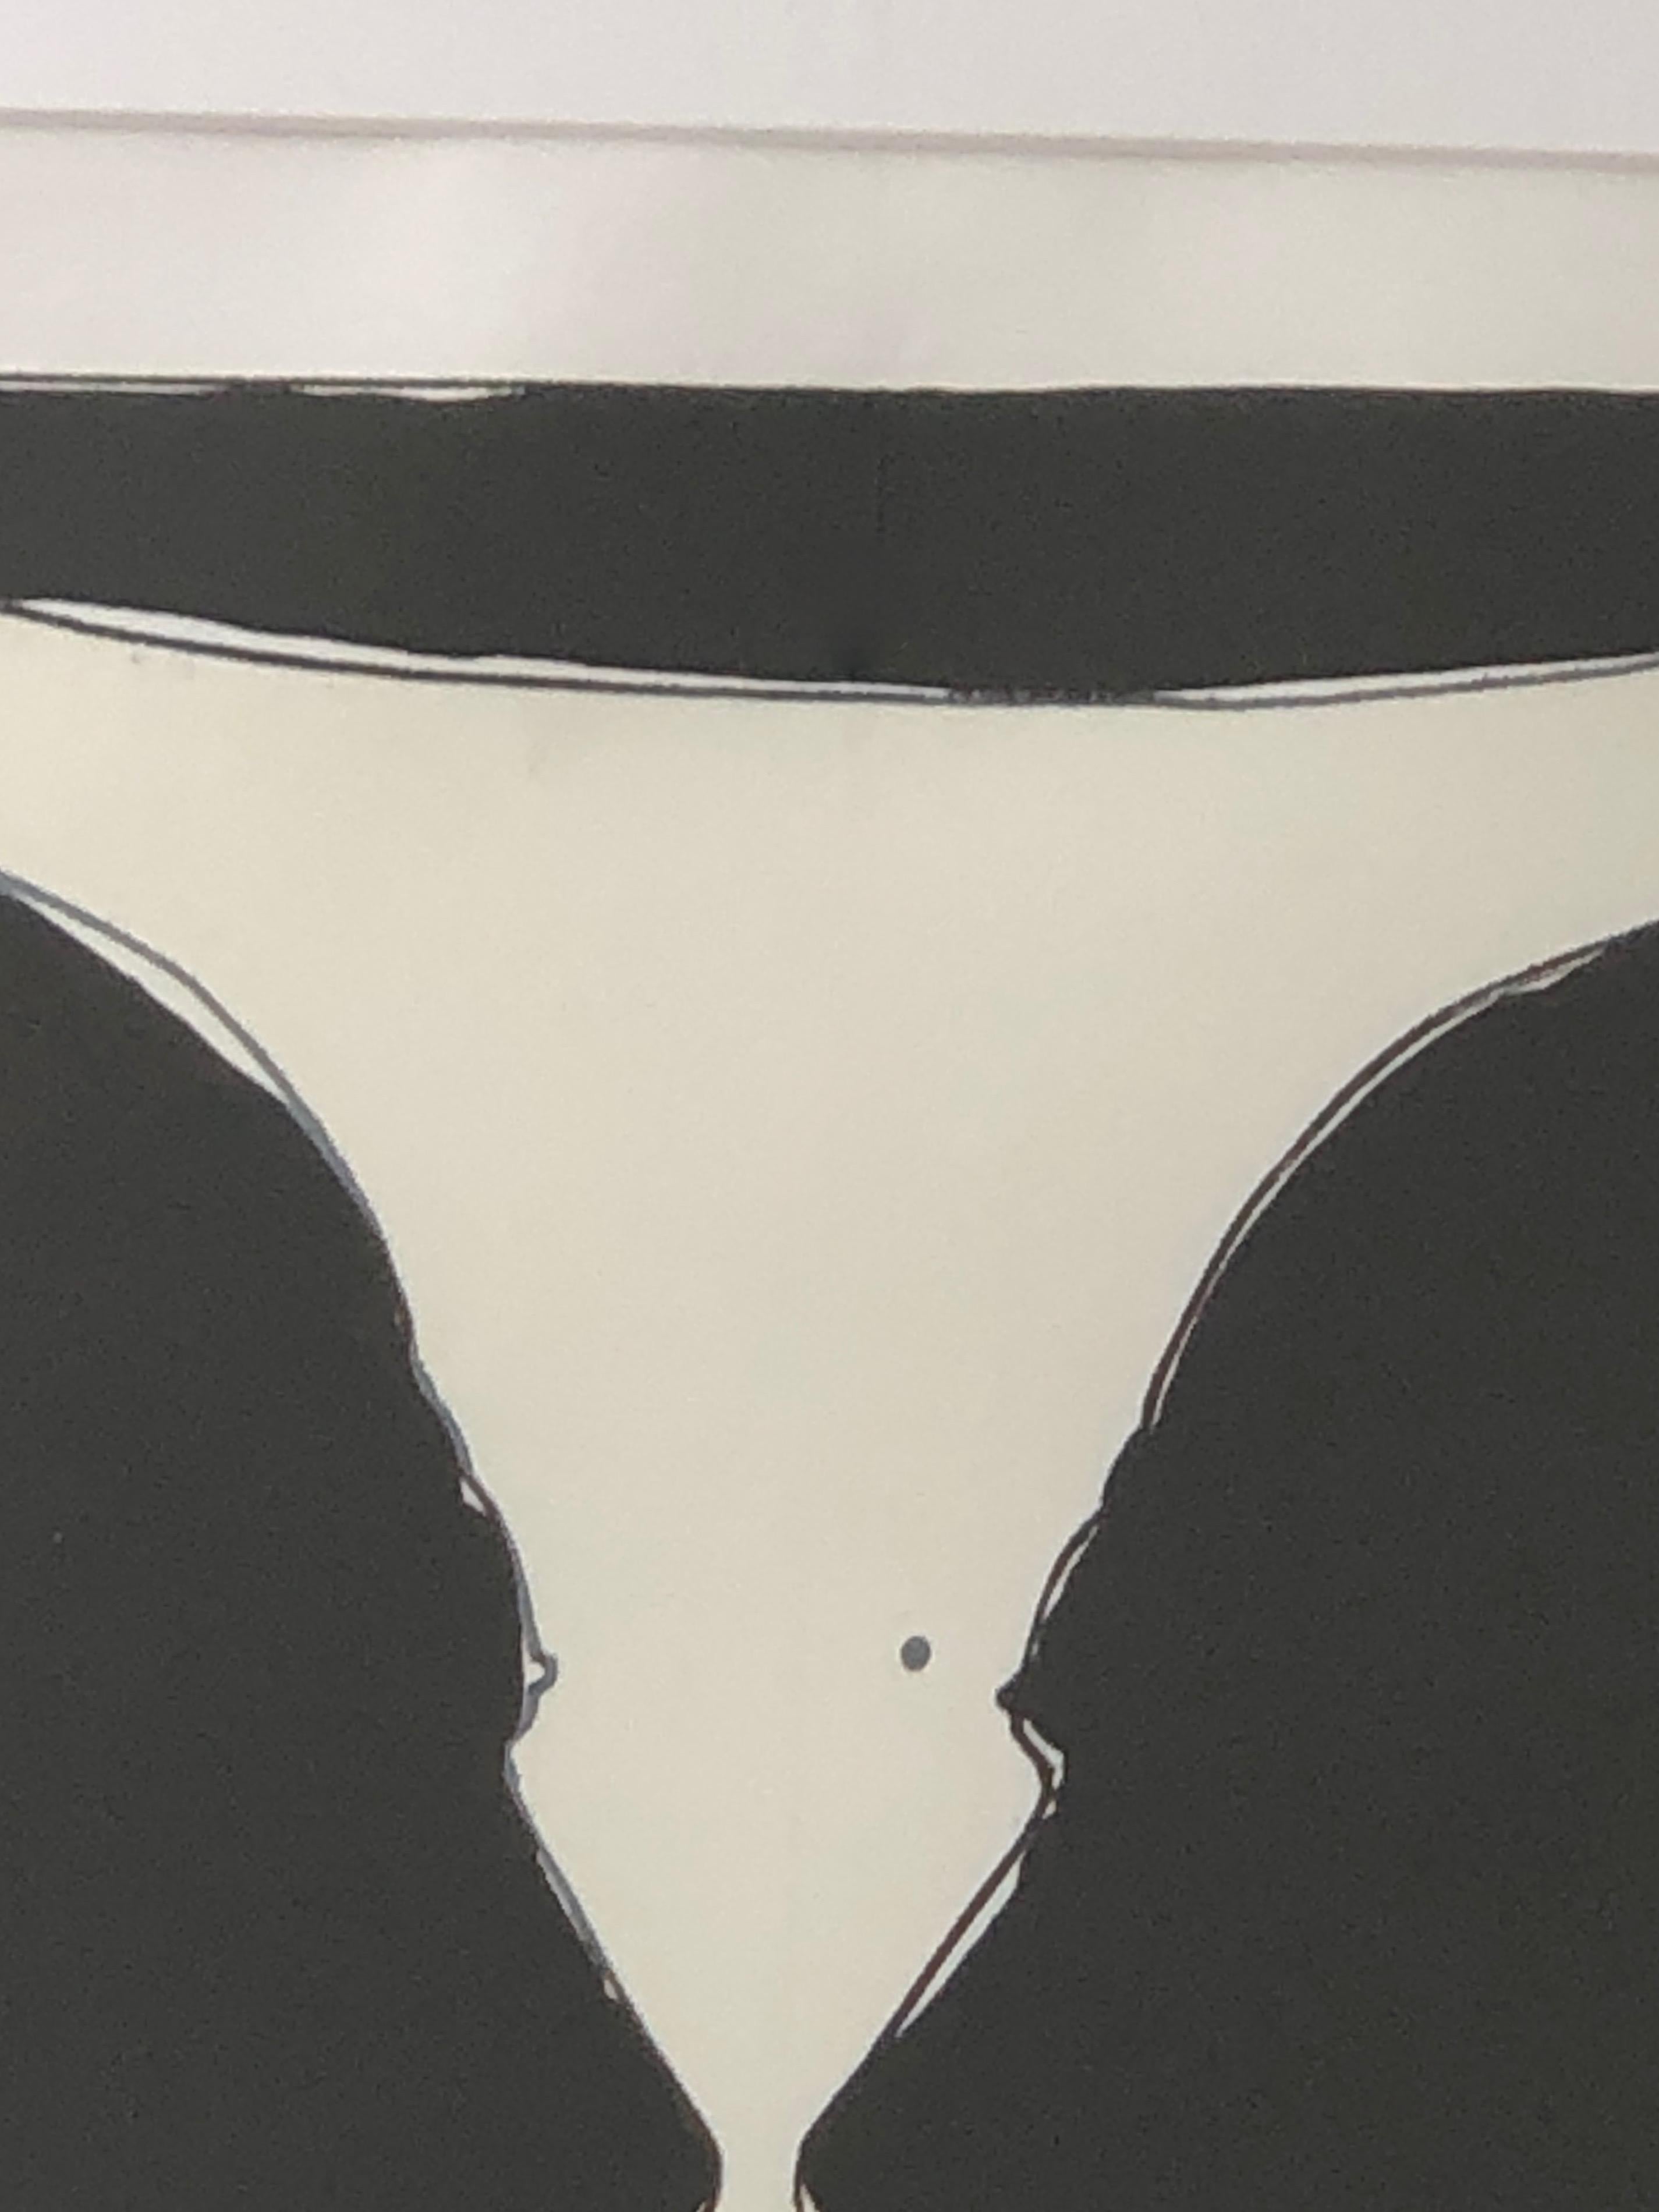 American Century Black and White Jasper Johns Lithograph, Cup Two Picasso, 1973